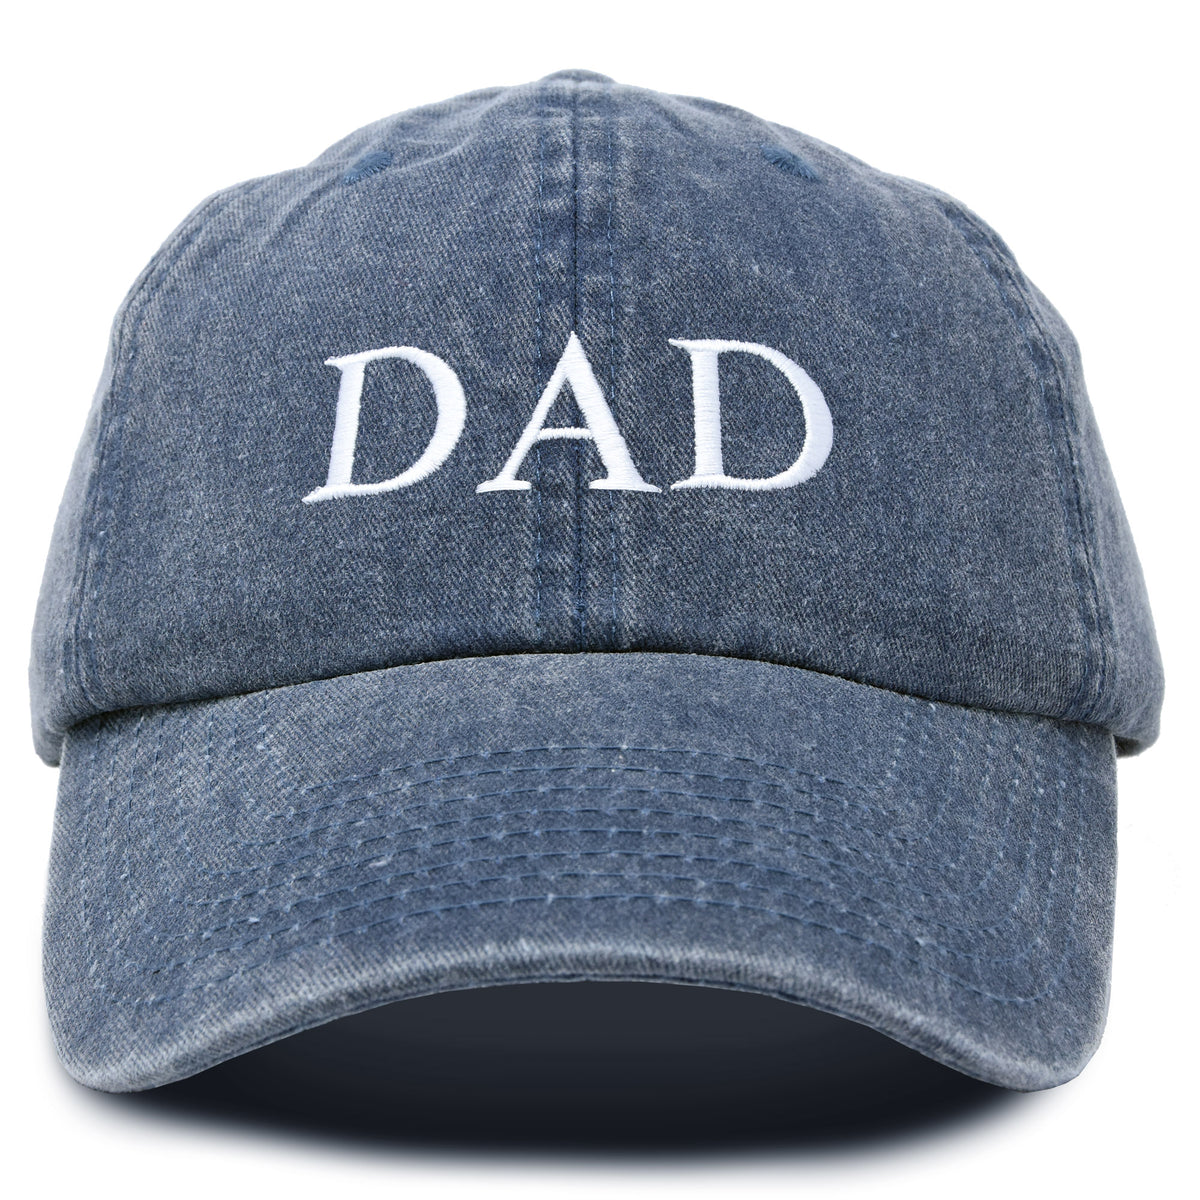 Being a Father: Yankees Giveaway